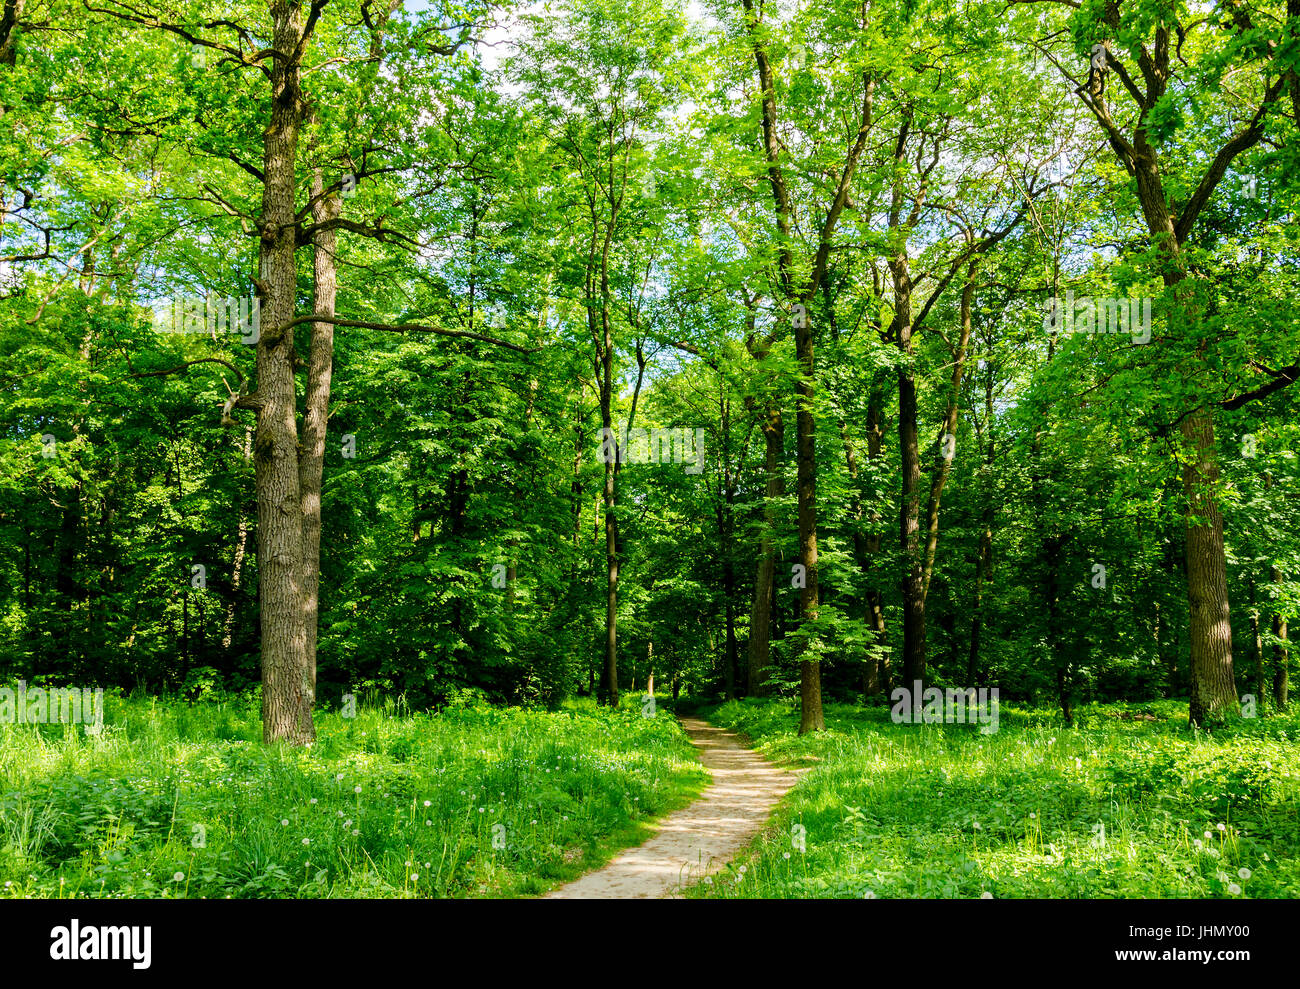 Road in a bright forest on a summer day with motley grass and fluffy white dandelions Stock Photo